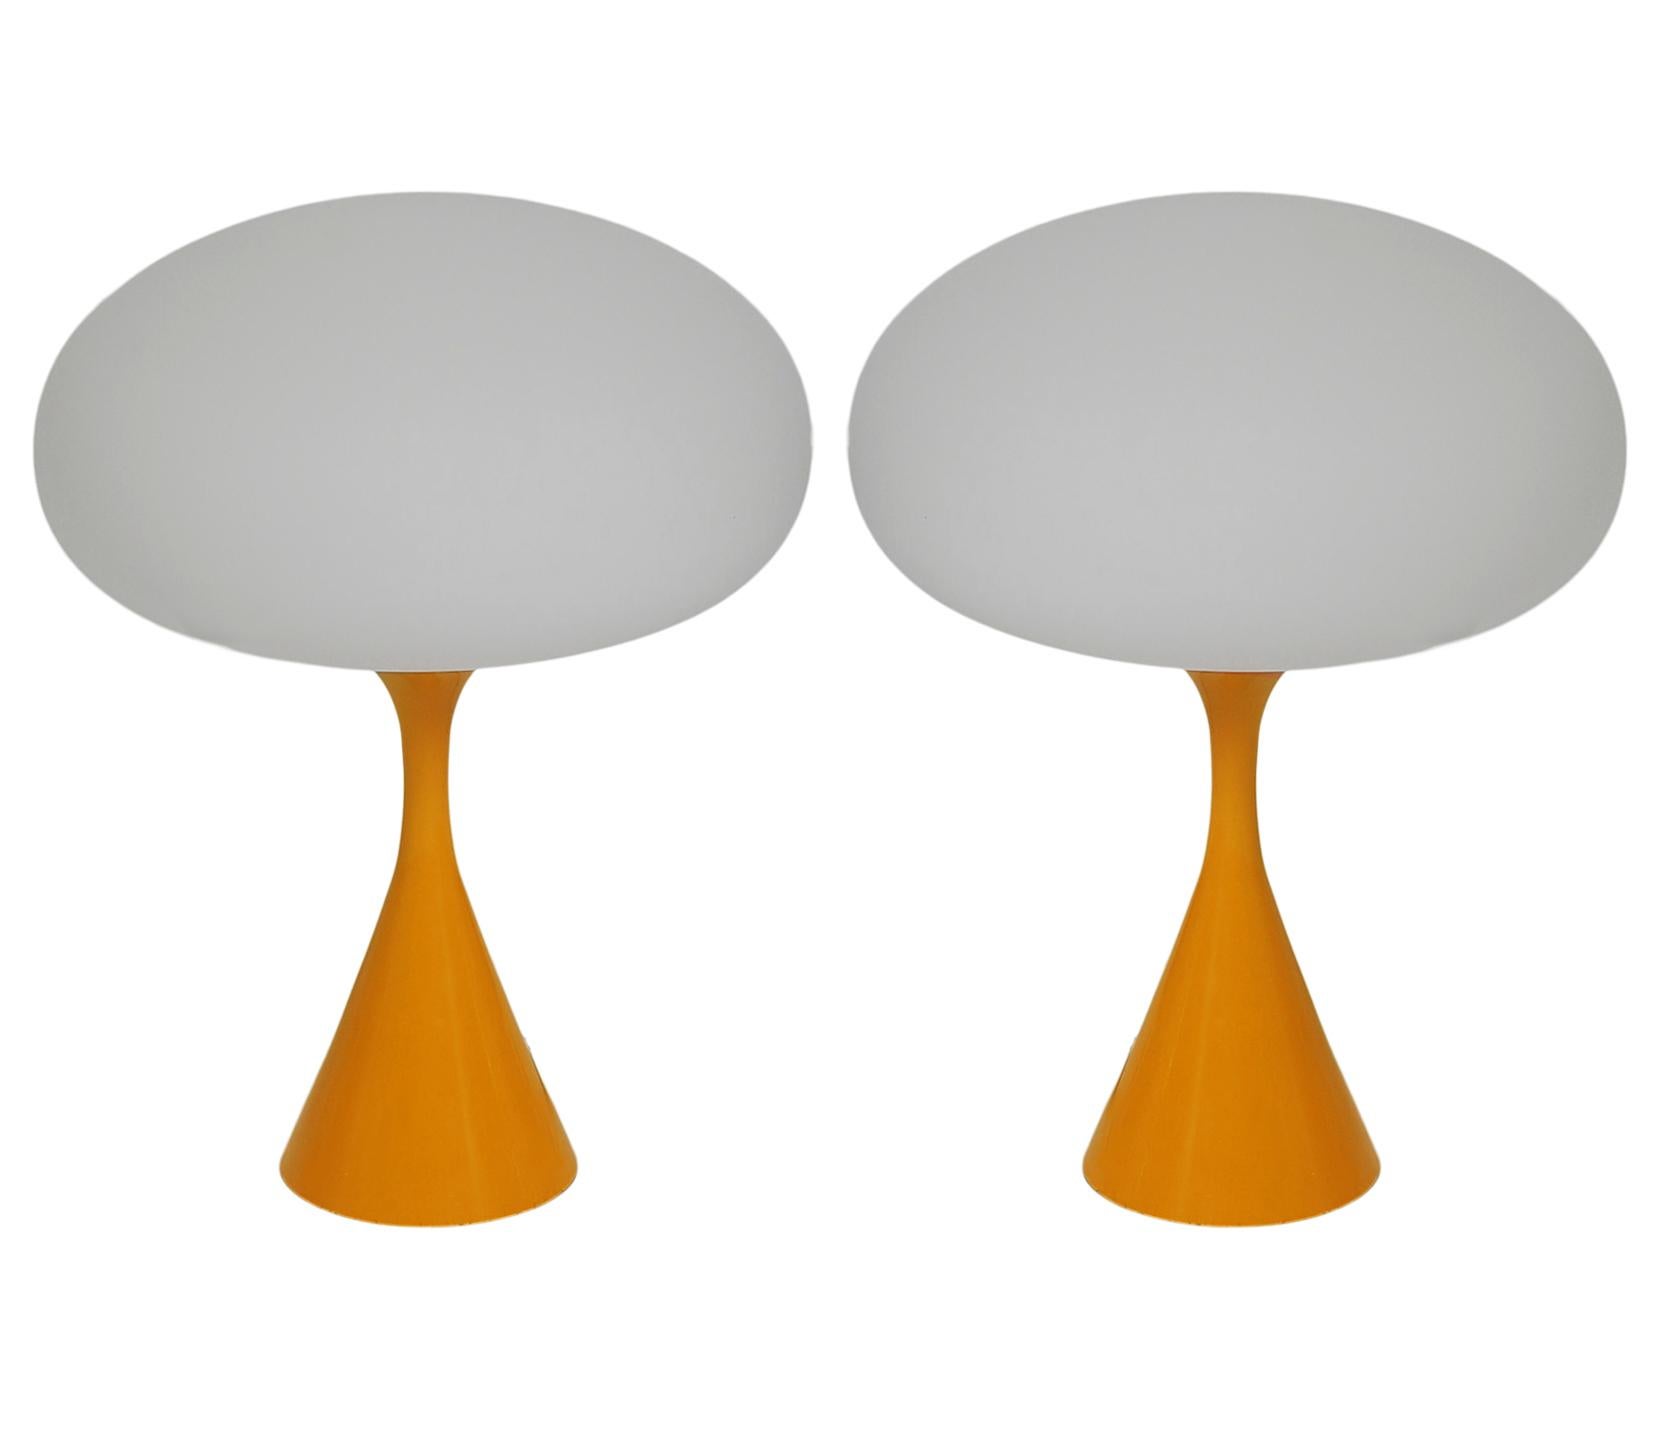 Indian Pair of Mid-Century Modern Table Lamps by Designline in Orange & White Glass For Sale